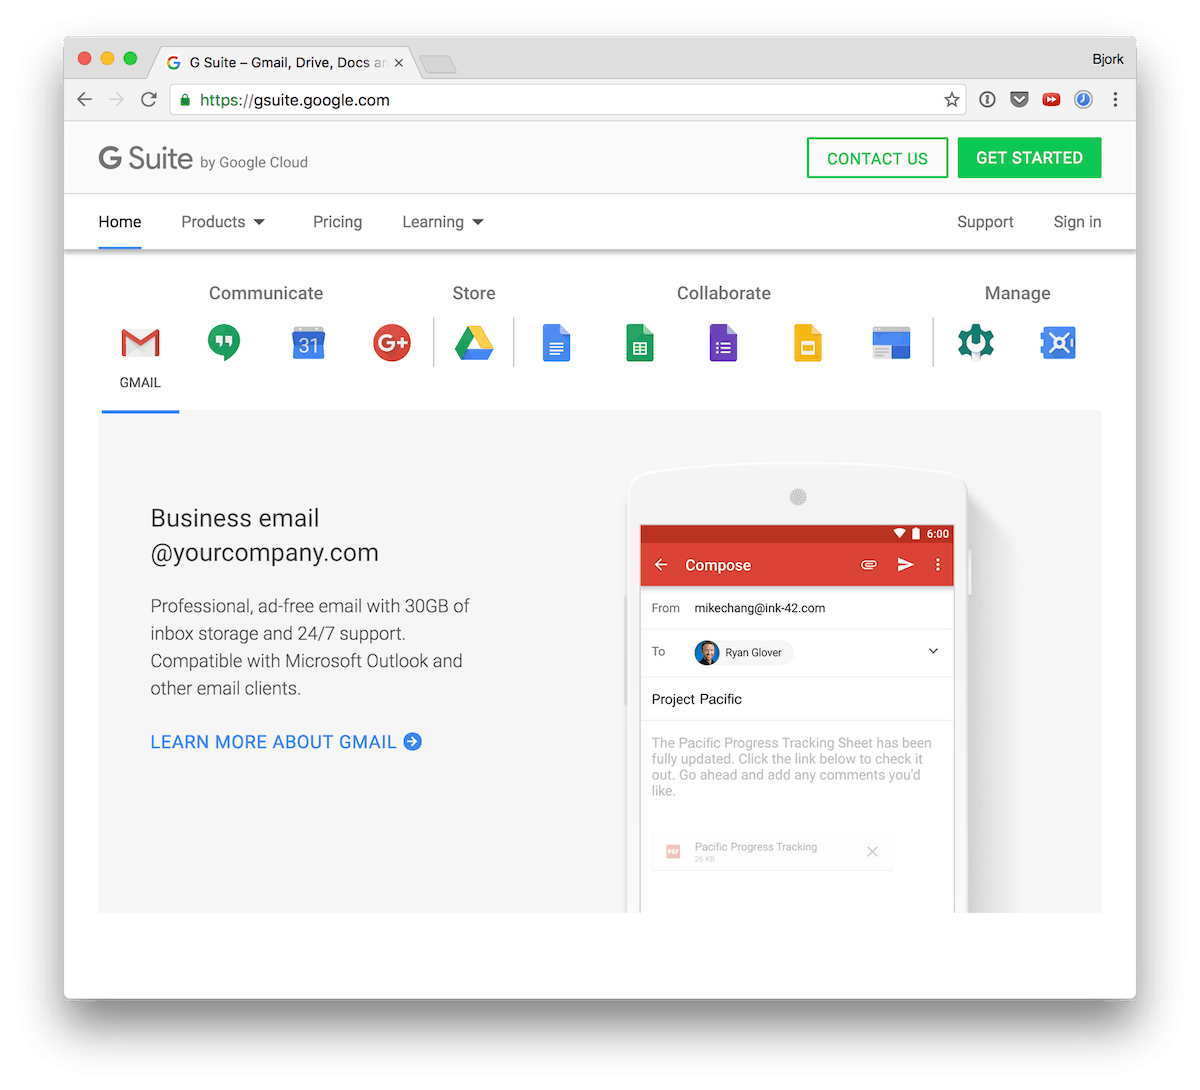 G Suite by Google.